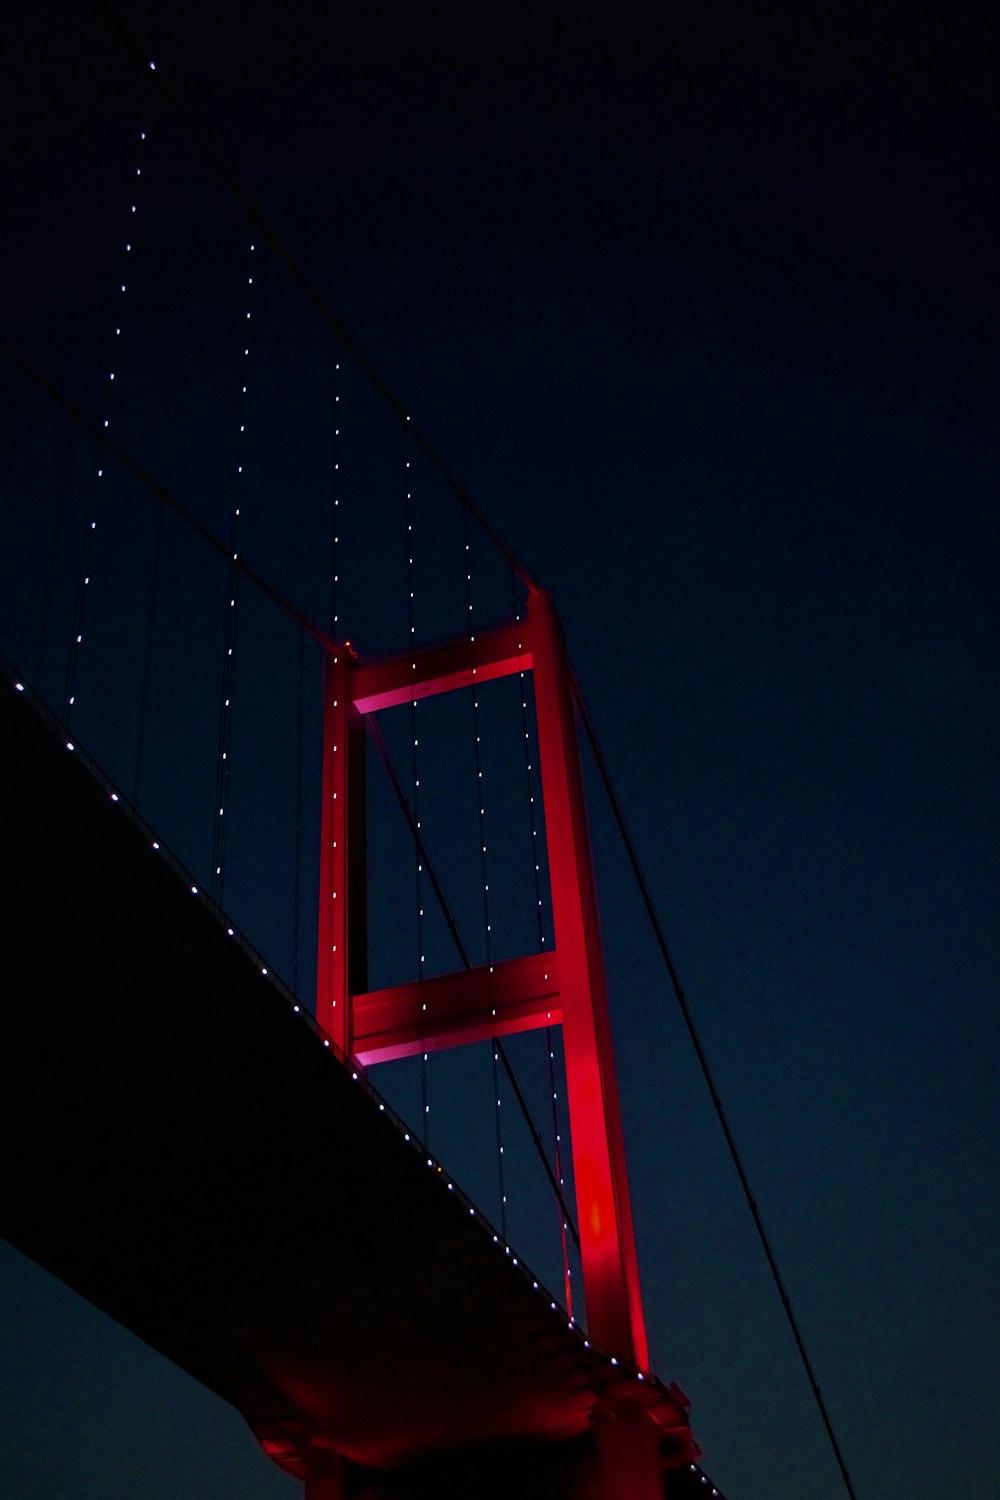 red bridge under blue sky during night time